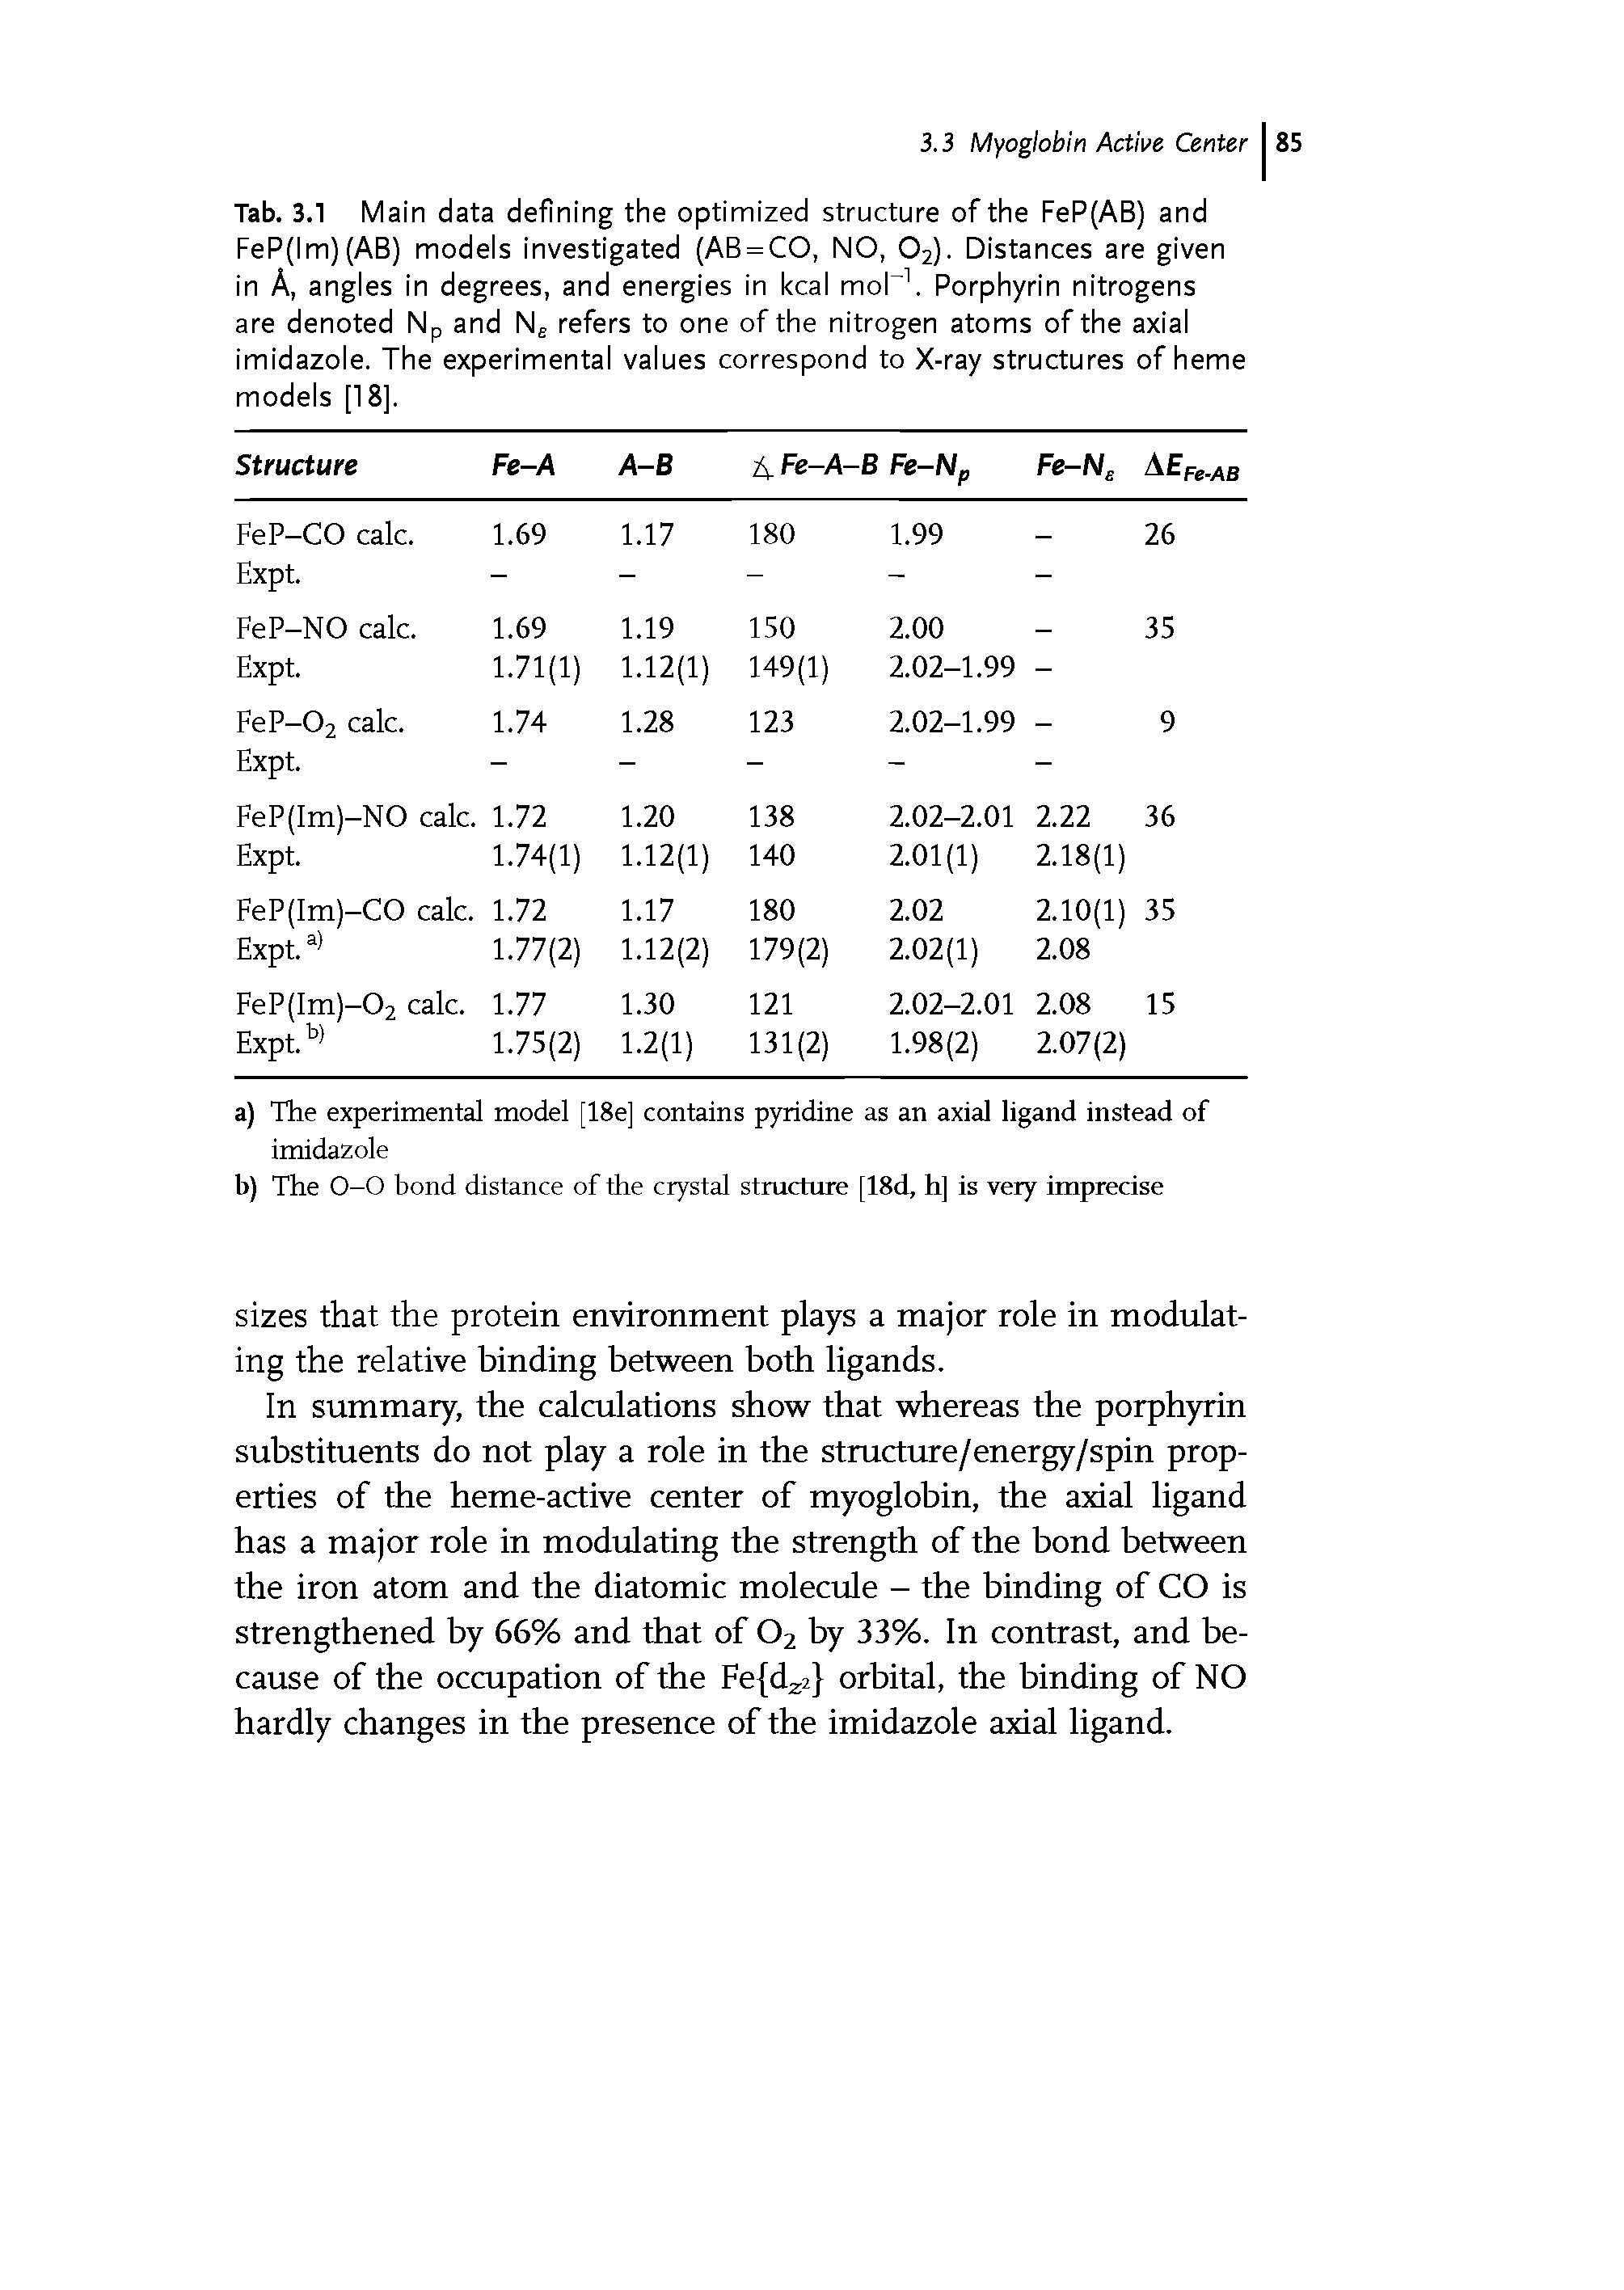 Tab. 3.1 Main data defining the optimized structure of the FeP(AB) and FeP(lm)(AB) models investigated (AB = CO, NO, 02). Distances are given in A, angles in degrees, and energies in kcal mob1. Porphyrin nitrogens are denoted Np and Nc refers to one of the nitrogen atoms of the axial imidazole. The experimental values correspond to X-ray structures of heme models [18].